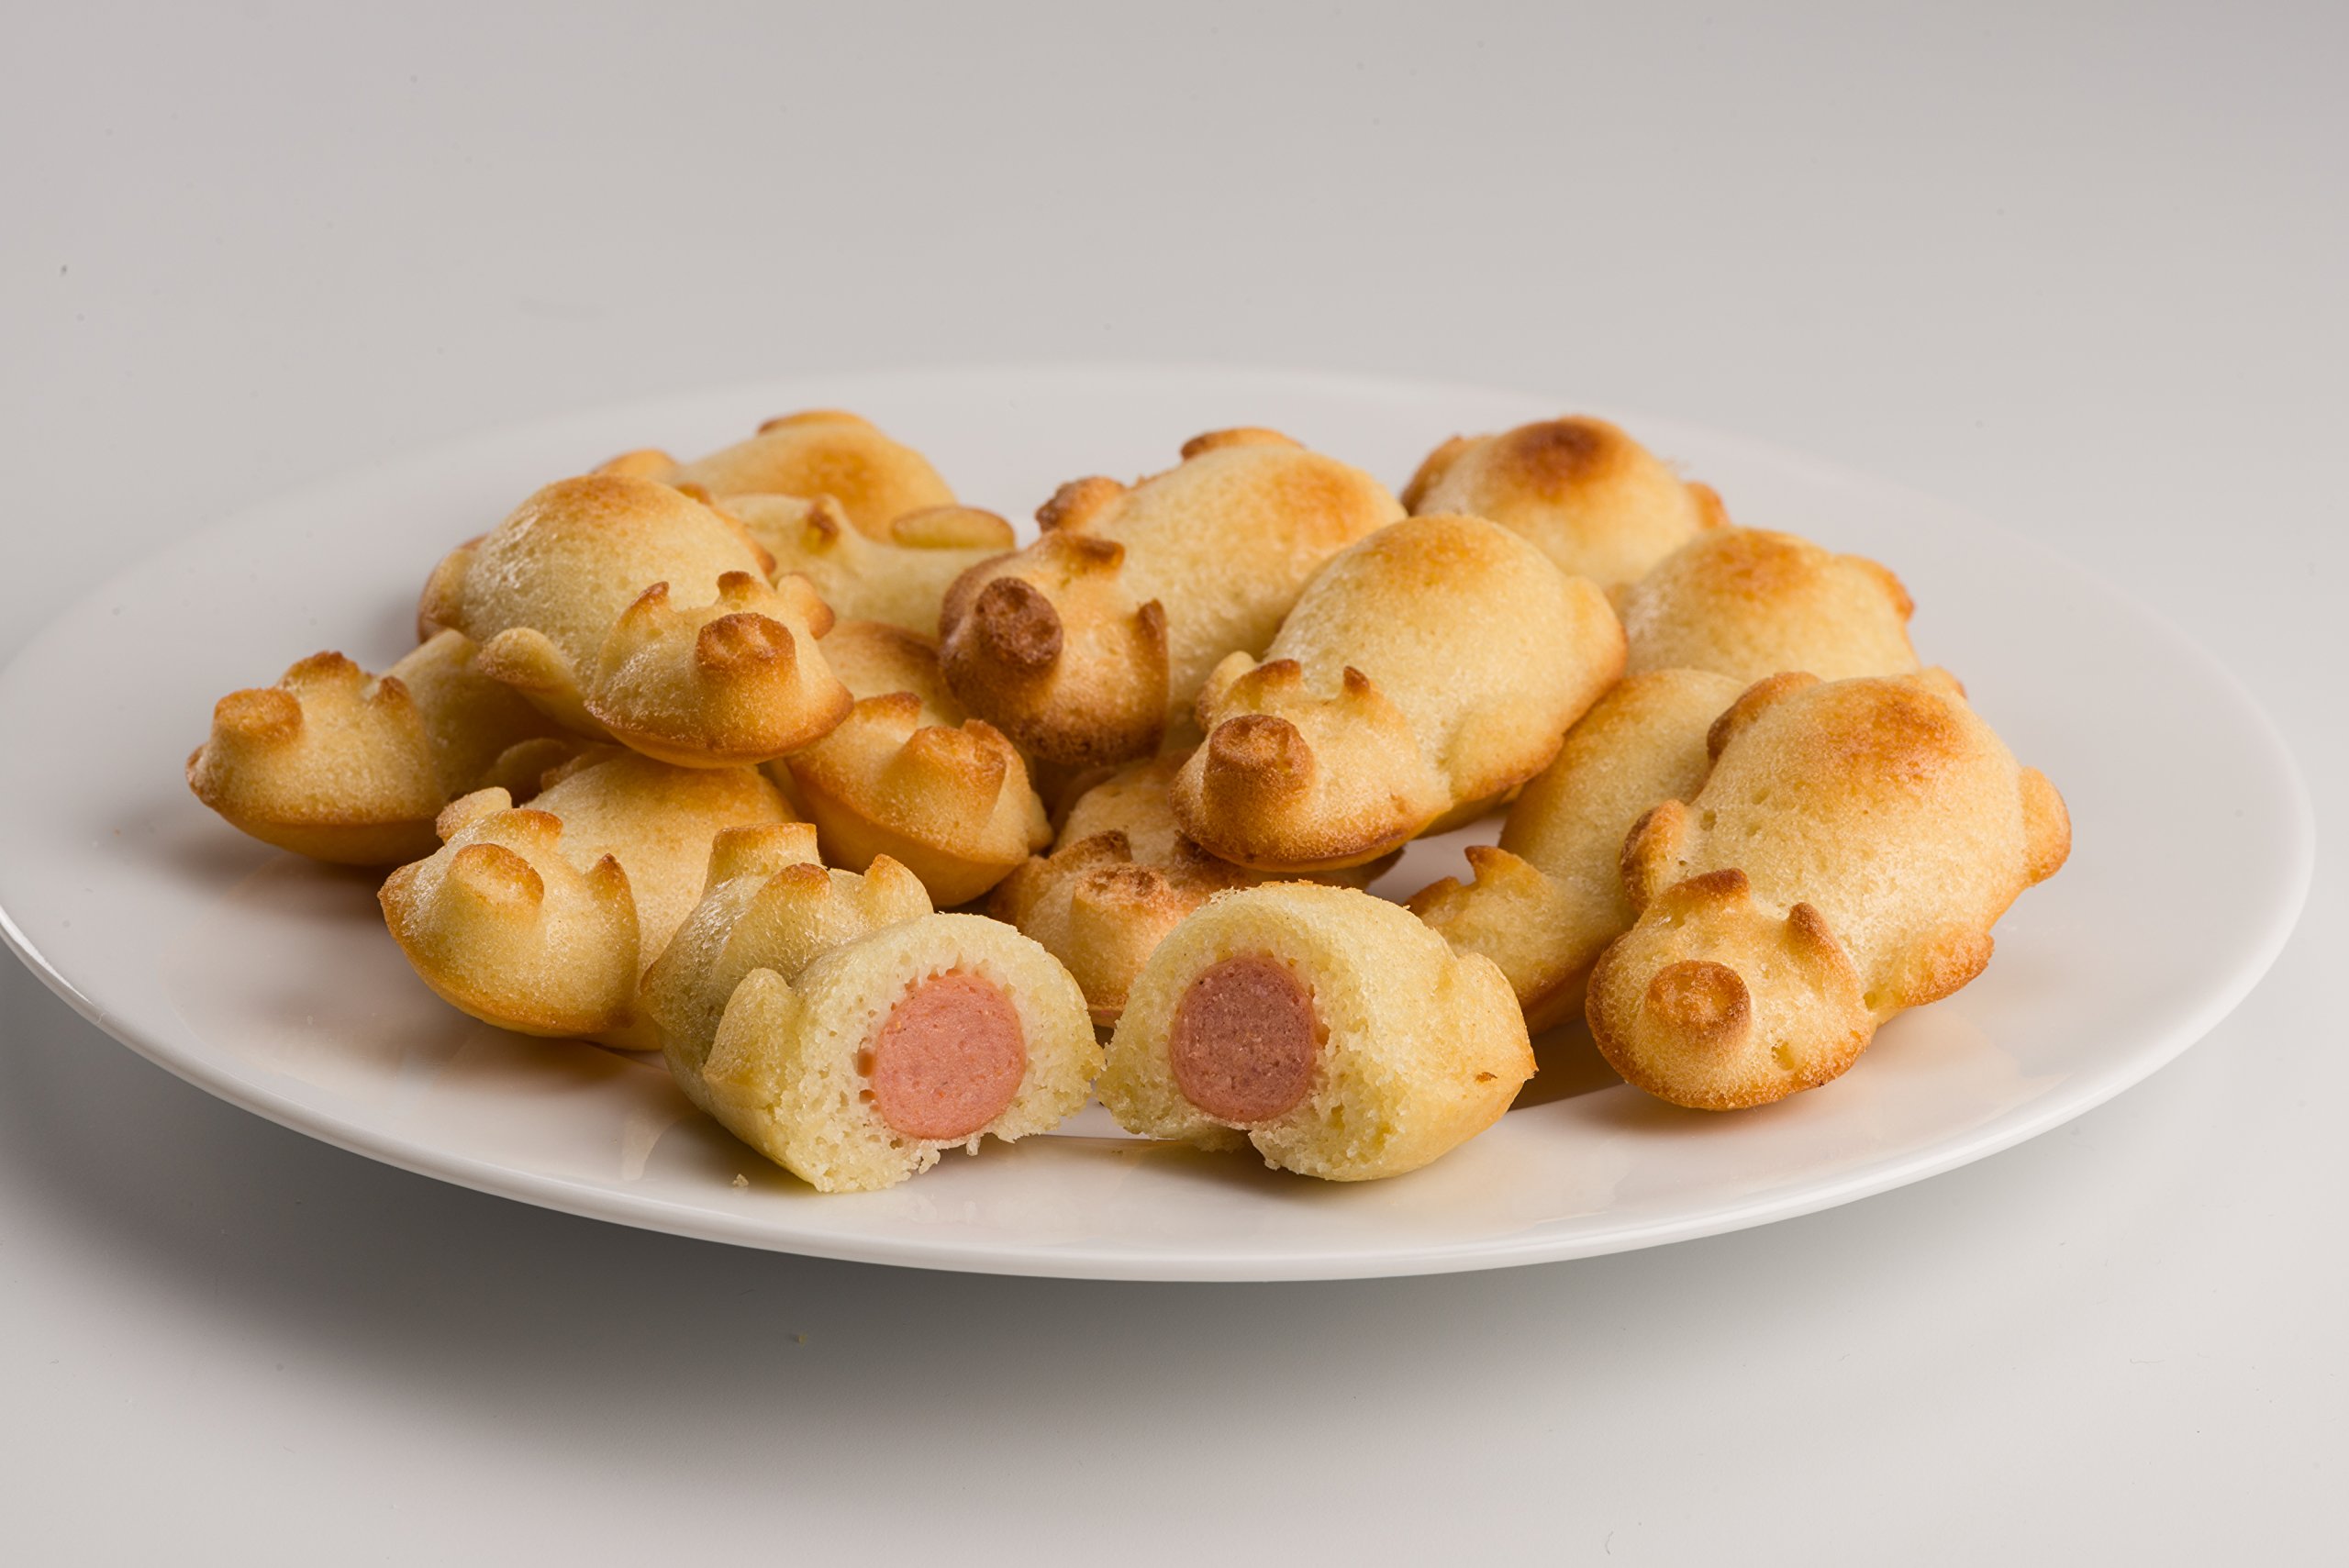 “The Original” - Pigs - “Pigs in a blanket” snack with a twist